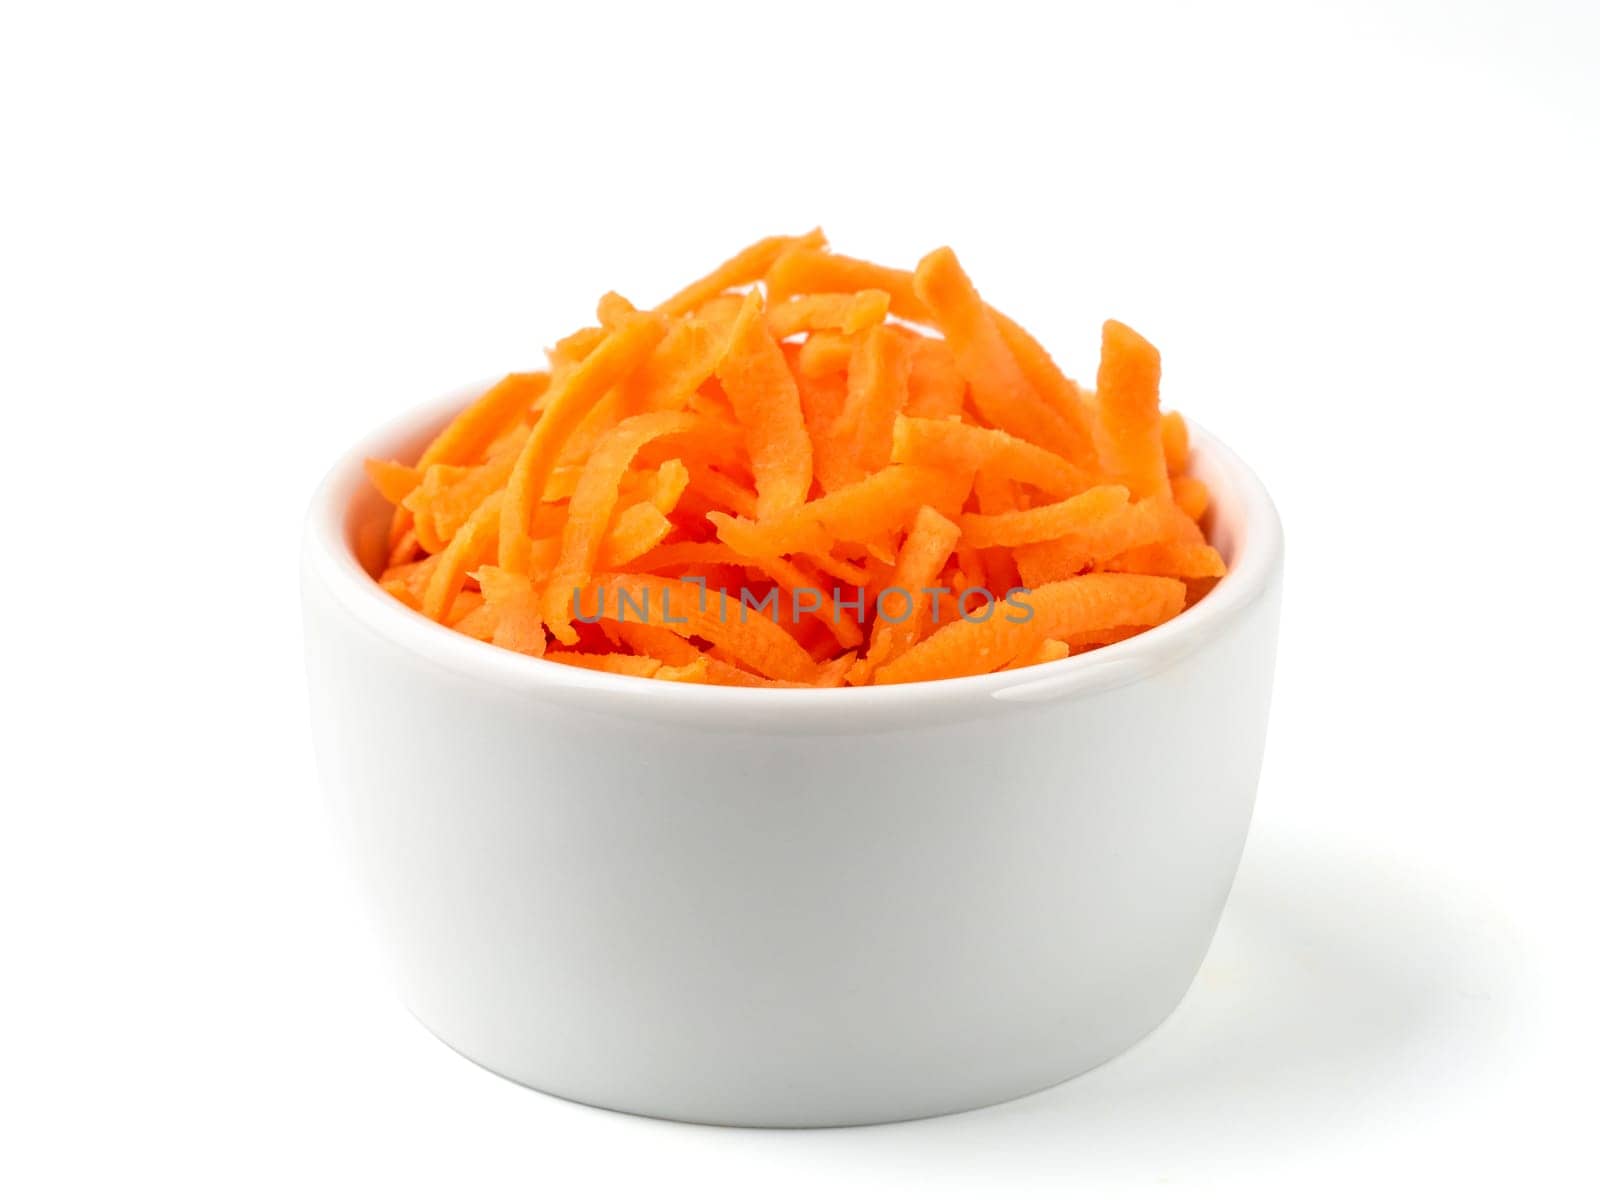 Fresh organic shredded carrots in small white bowl. Raw grated carrots isolated on white with clipping path.